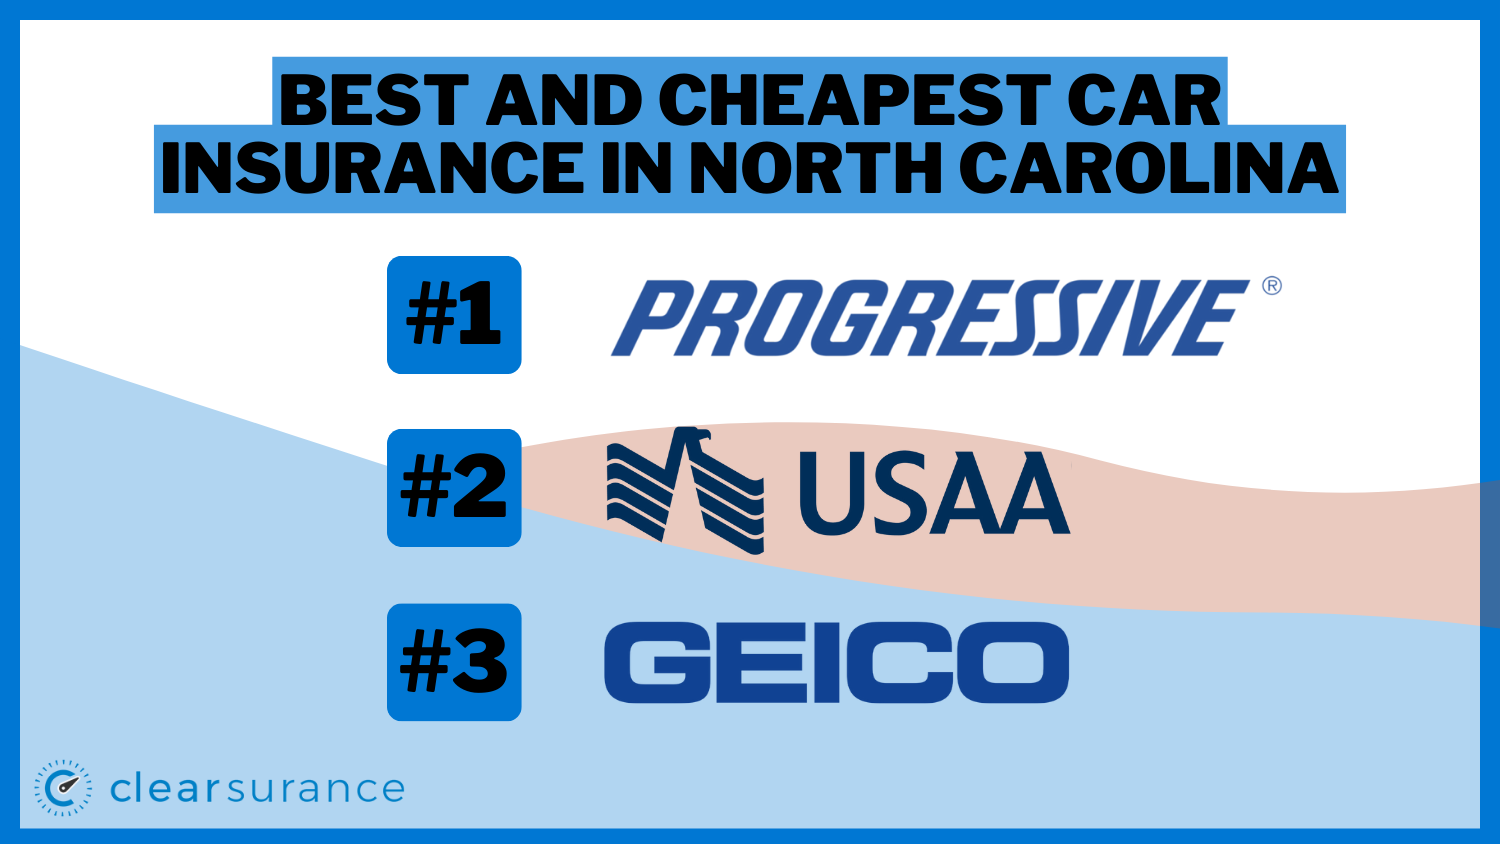 Best and Cheapest Car Insurance in North Carolina